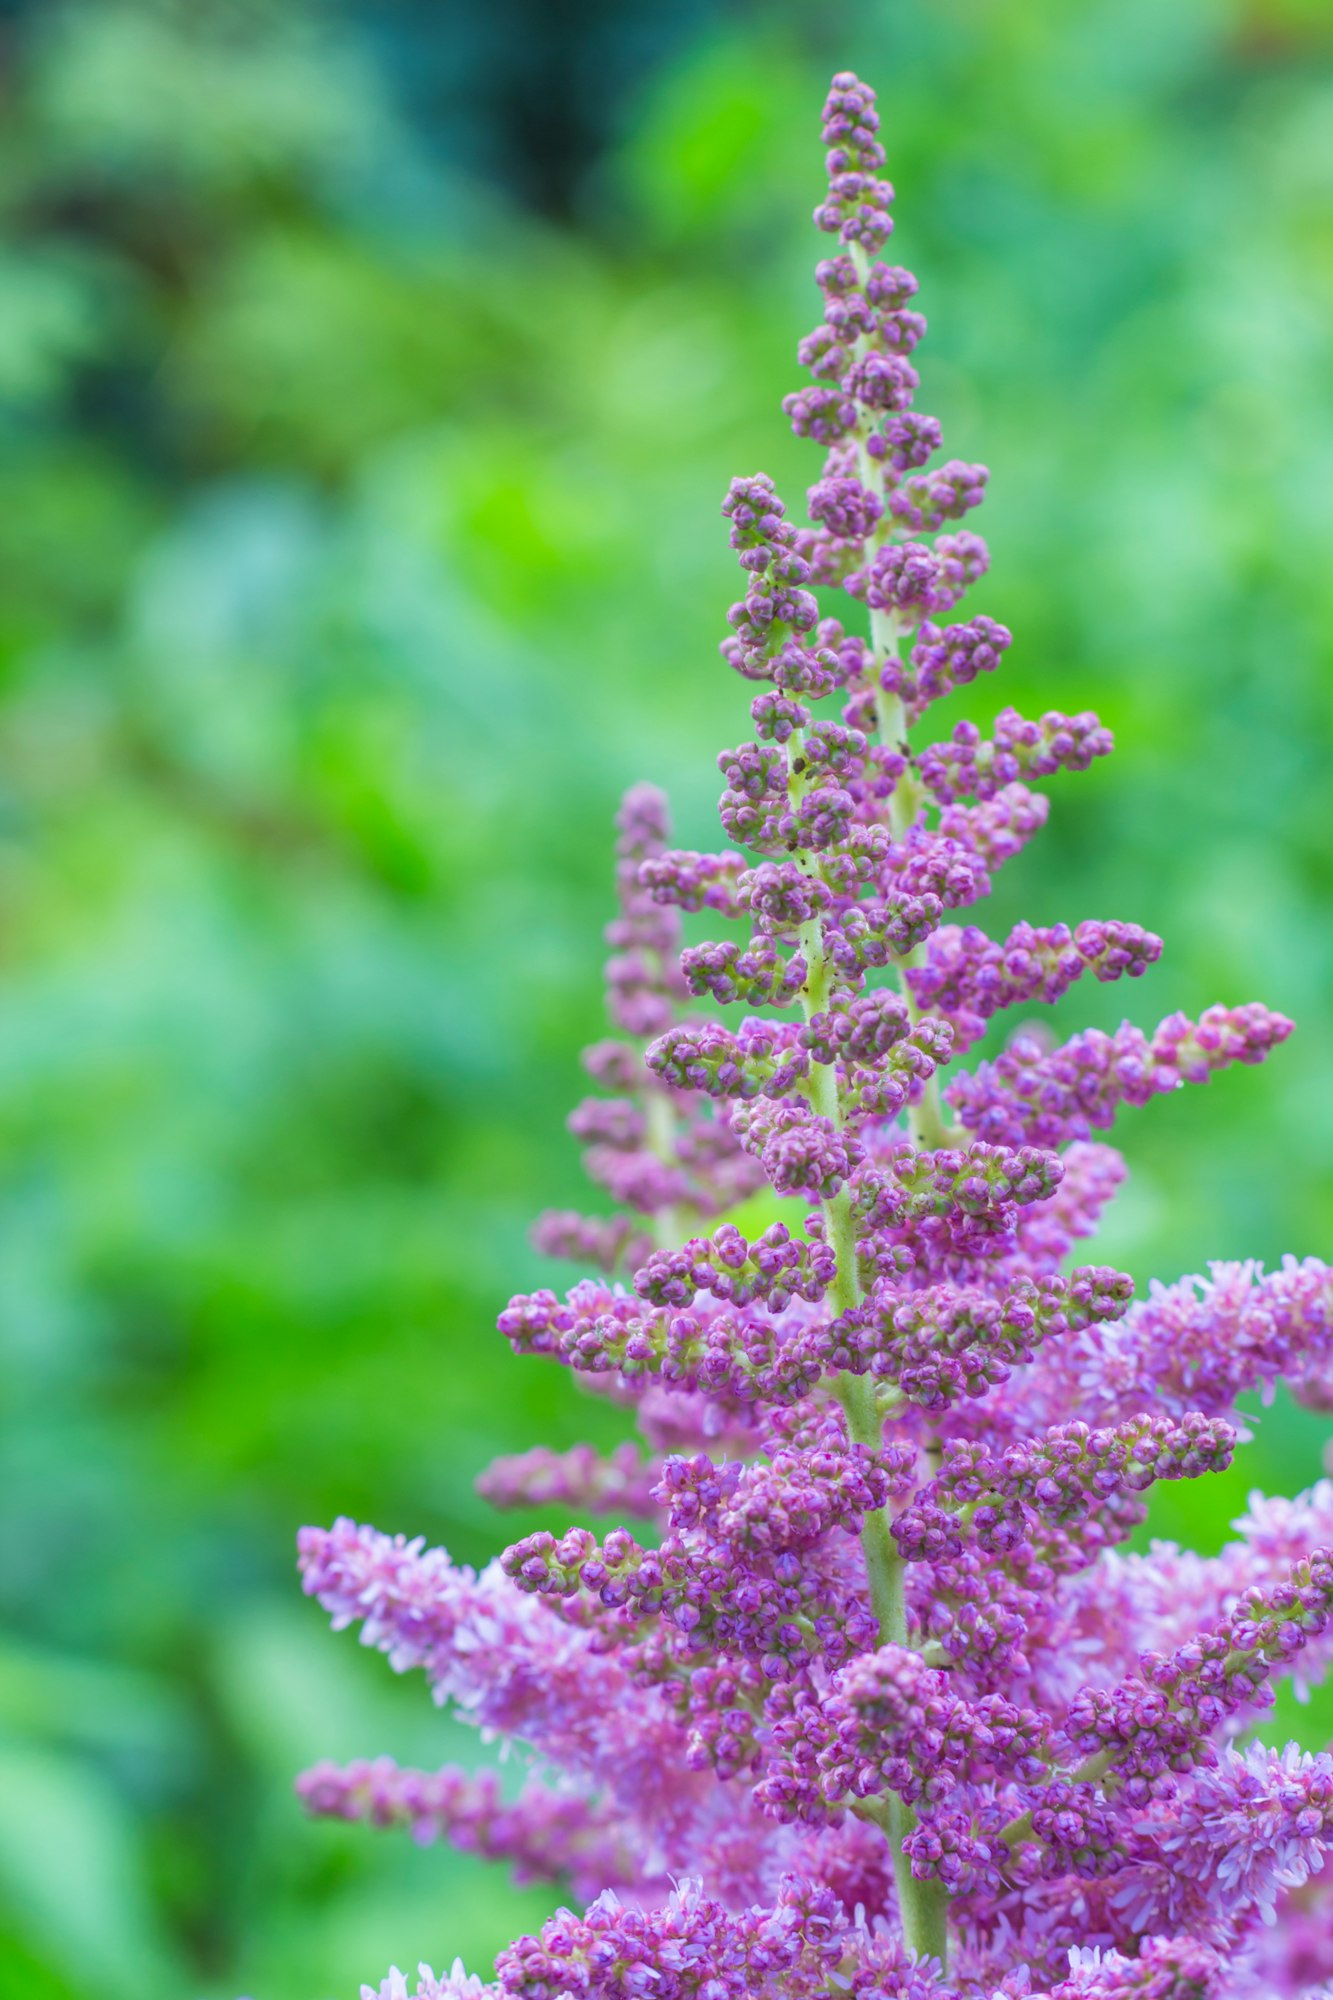 Astilbe blooming in the garden